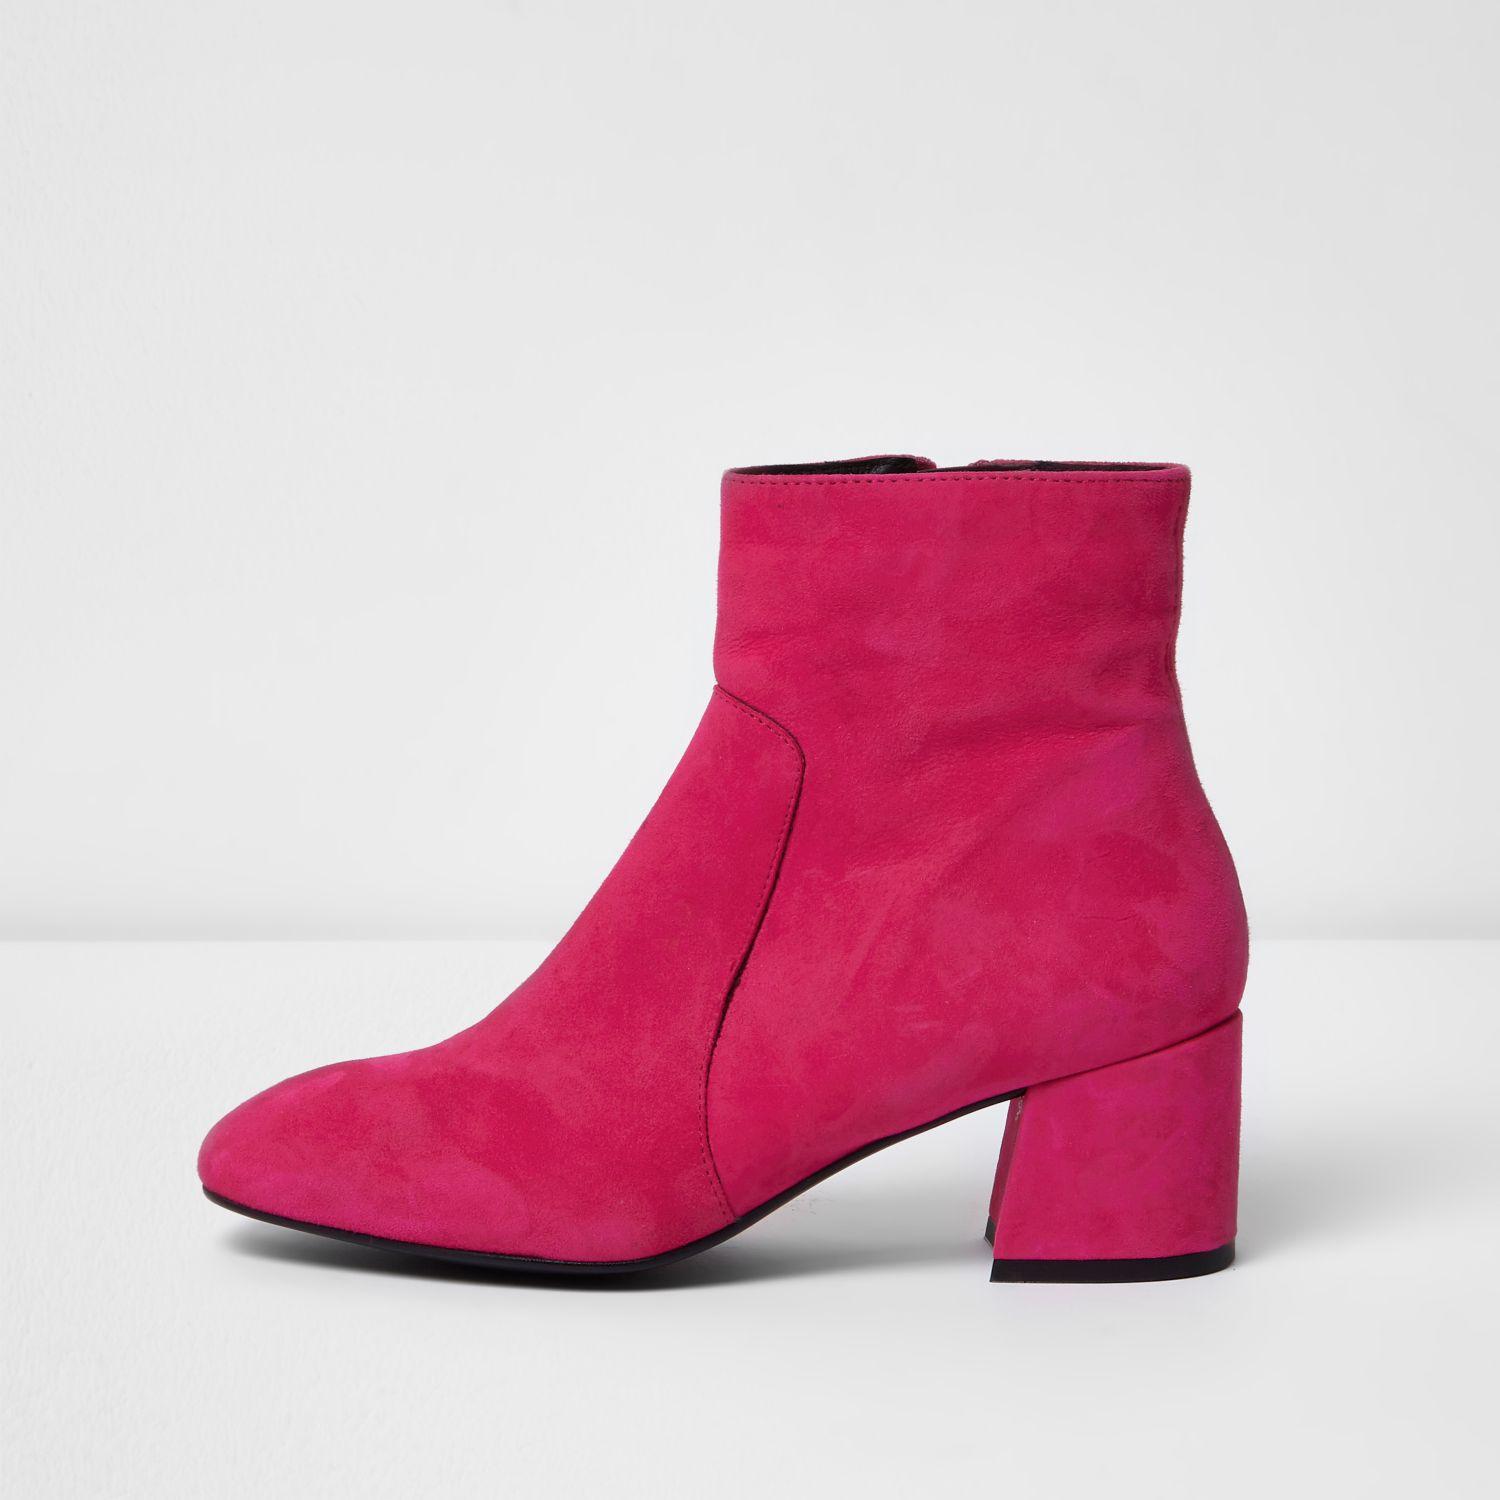 River Island Bright Pink Suede Block Heel Ankle Boots | Lyst UK